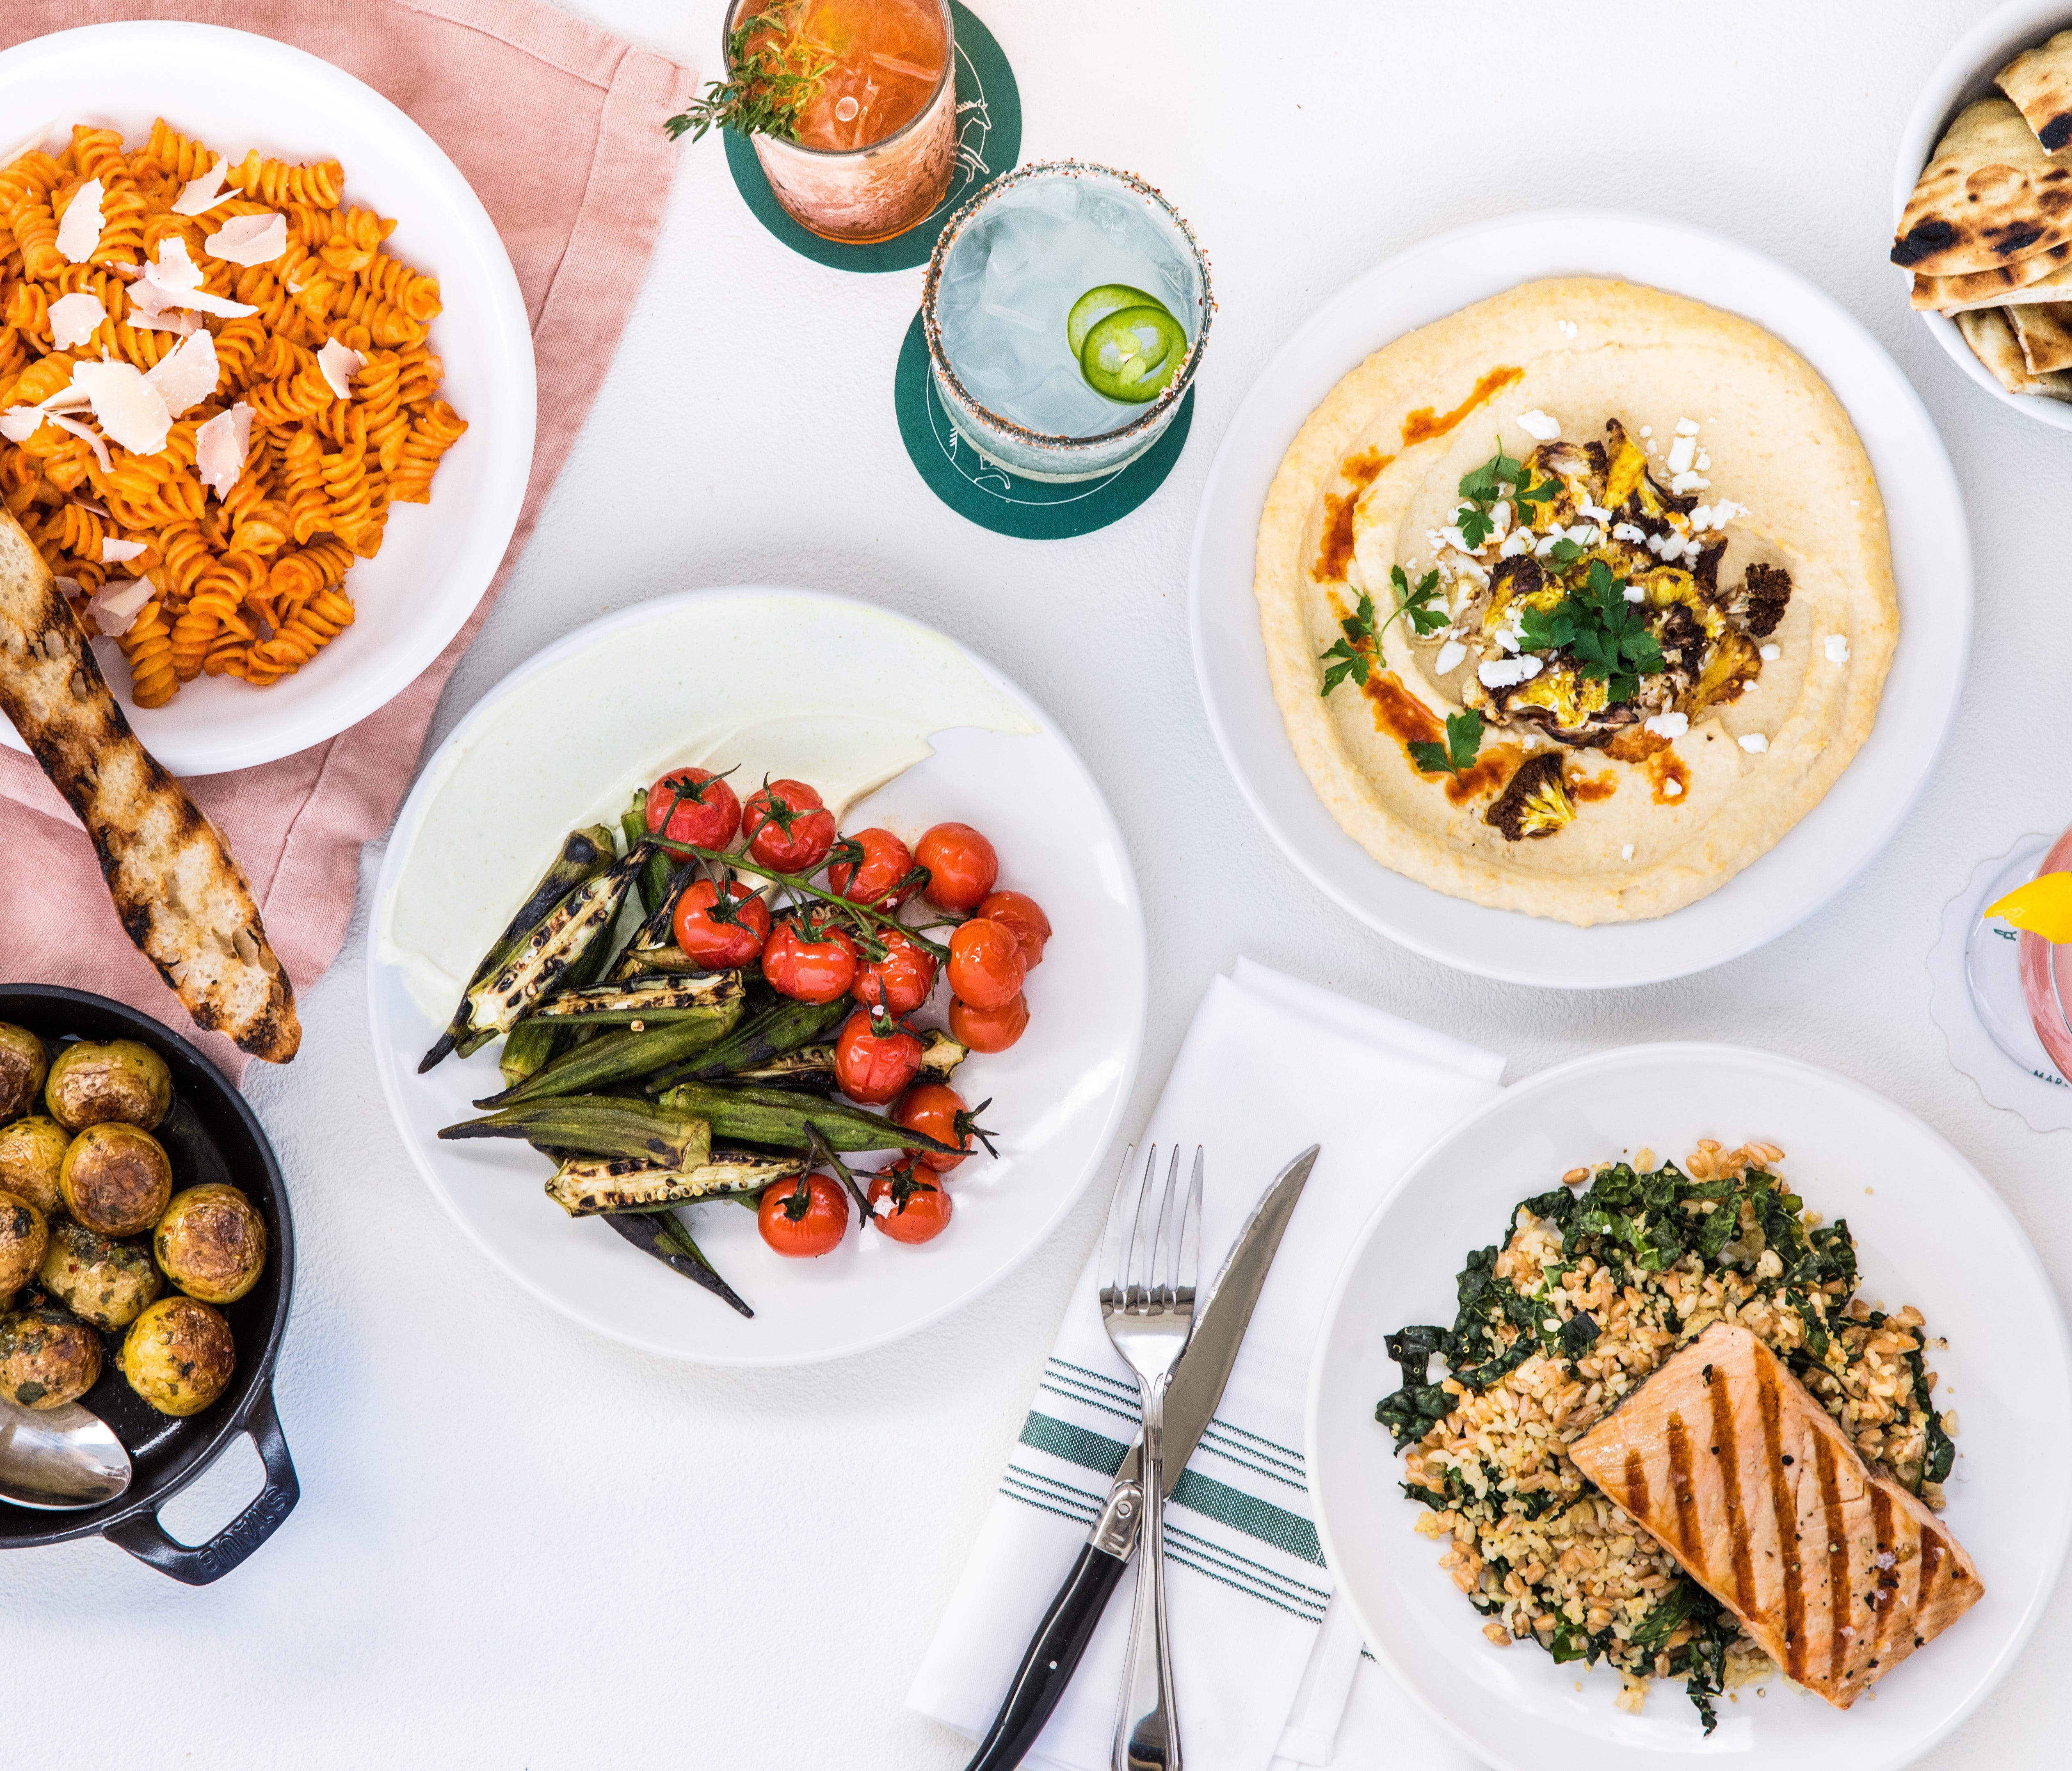 Owners Jessie Katz and Andy Means offer fresh, afforable comfort food, such as hummus, fusilli pasta, potatoes, wood-grilled salmon and vegetables.